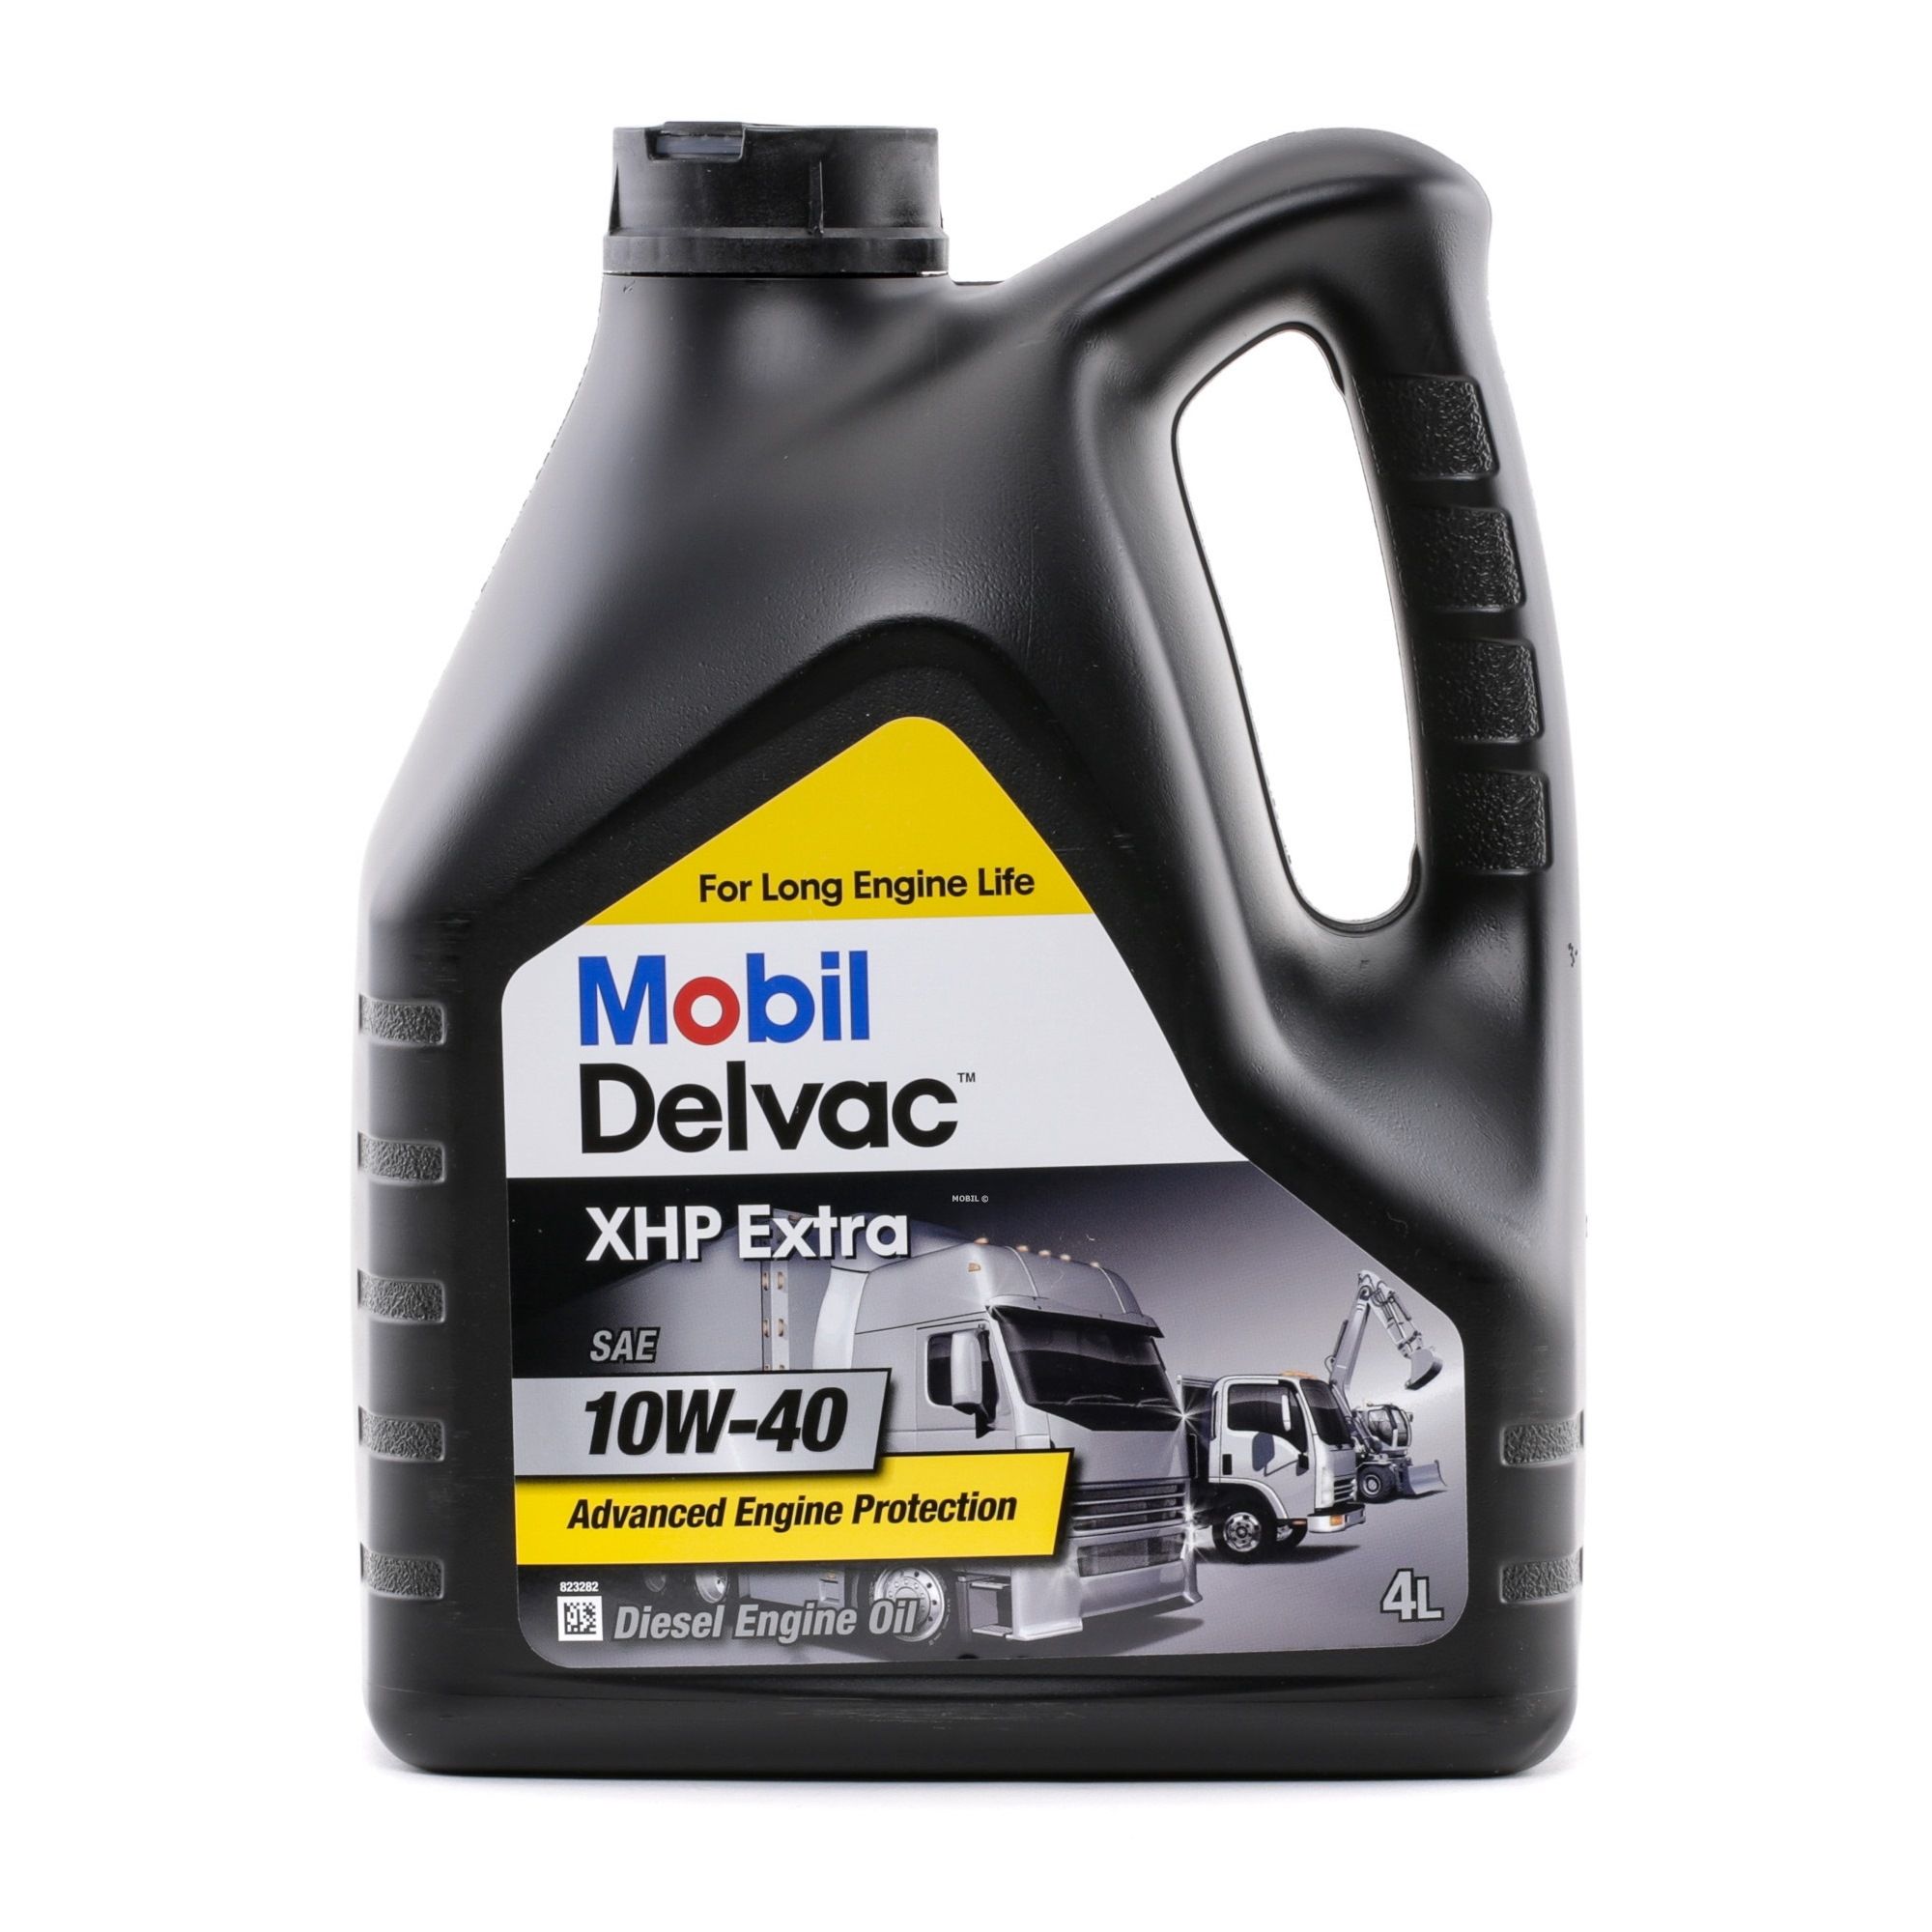 MOBIL 148369 Engine oil cheap in online store